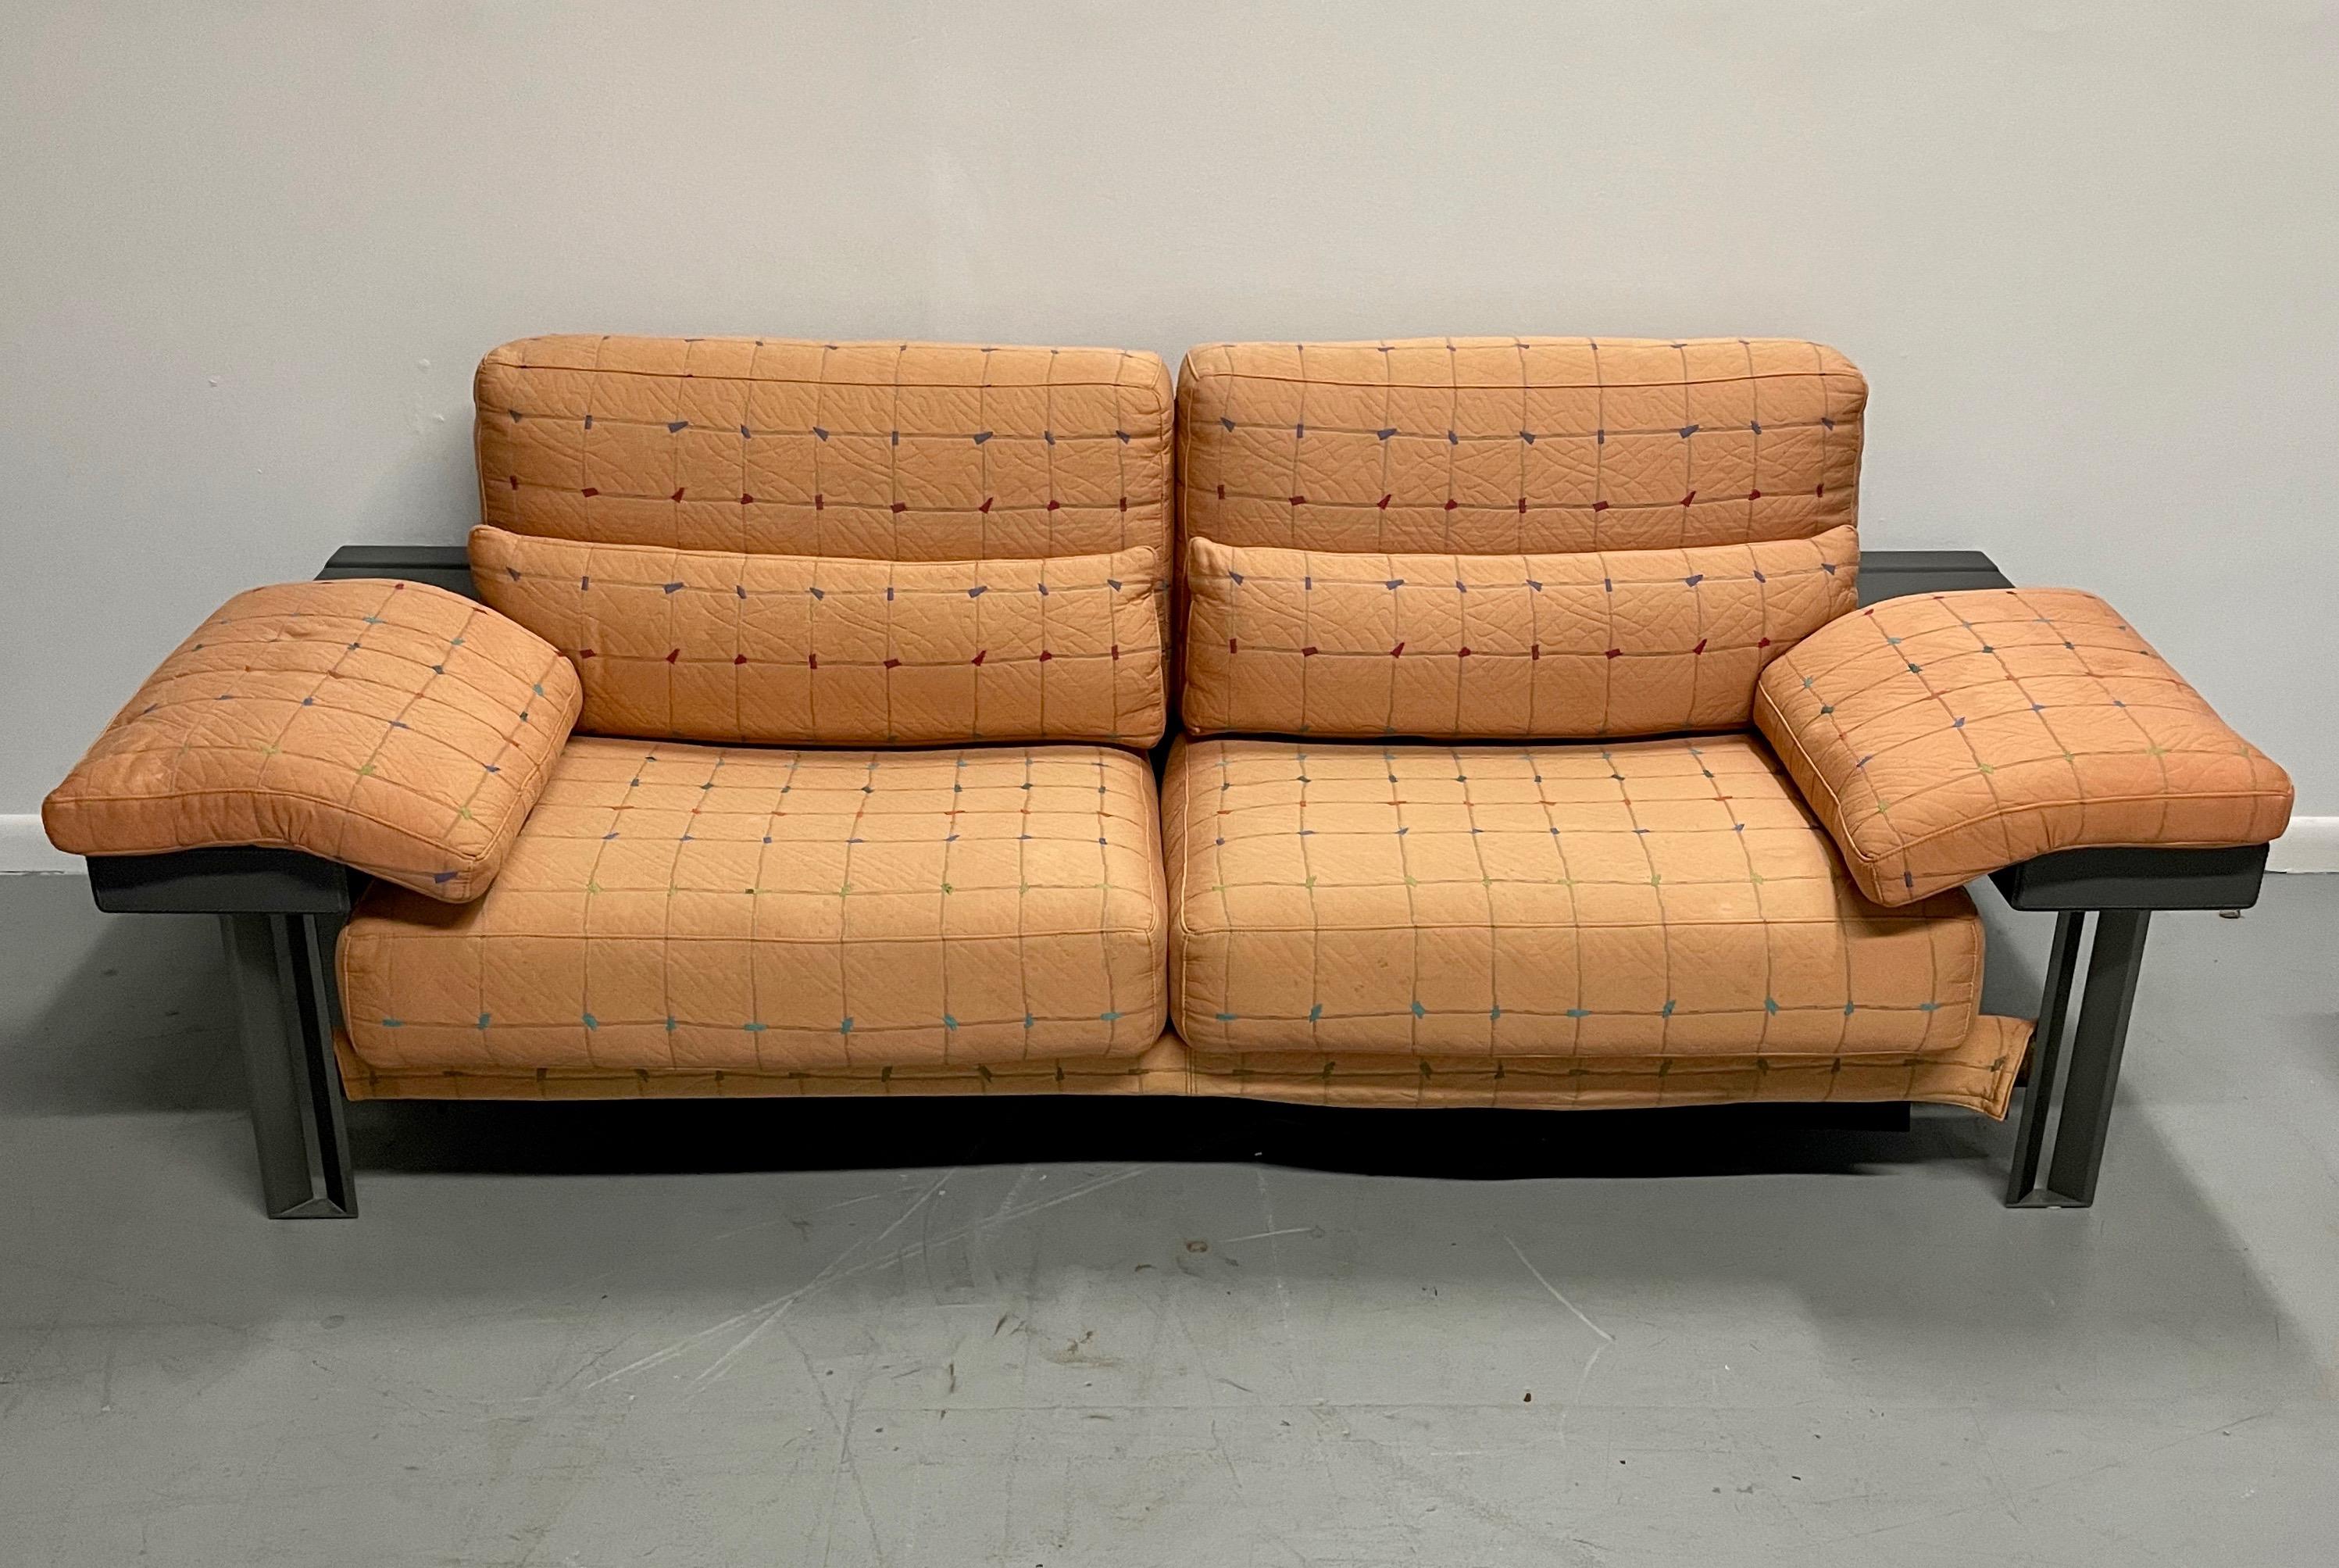 This Saporiti loveseat in it's original fabric is meticulously constructed of stainless steel, burl panels and leather arms and full back. This item needs to be reupholstered. We can reupholster this loveseat in COM. We can also also reconstruct the